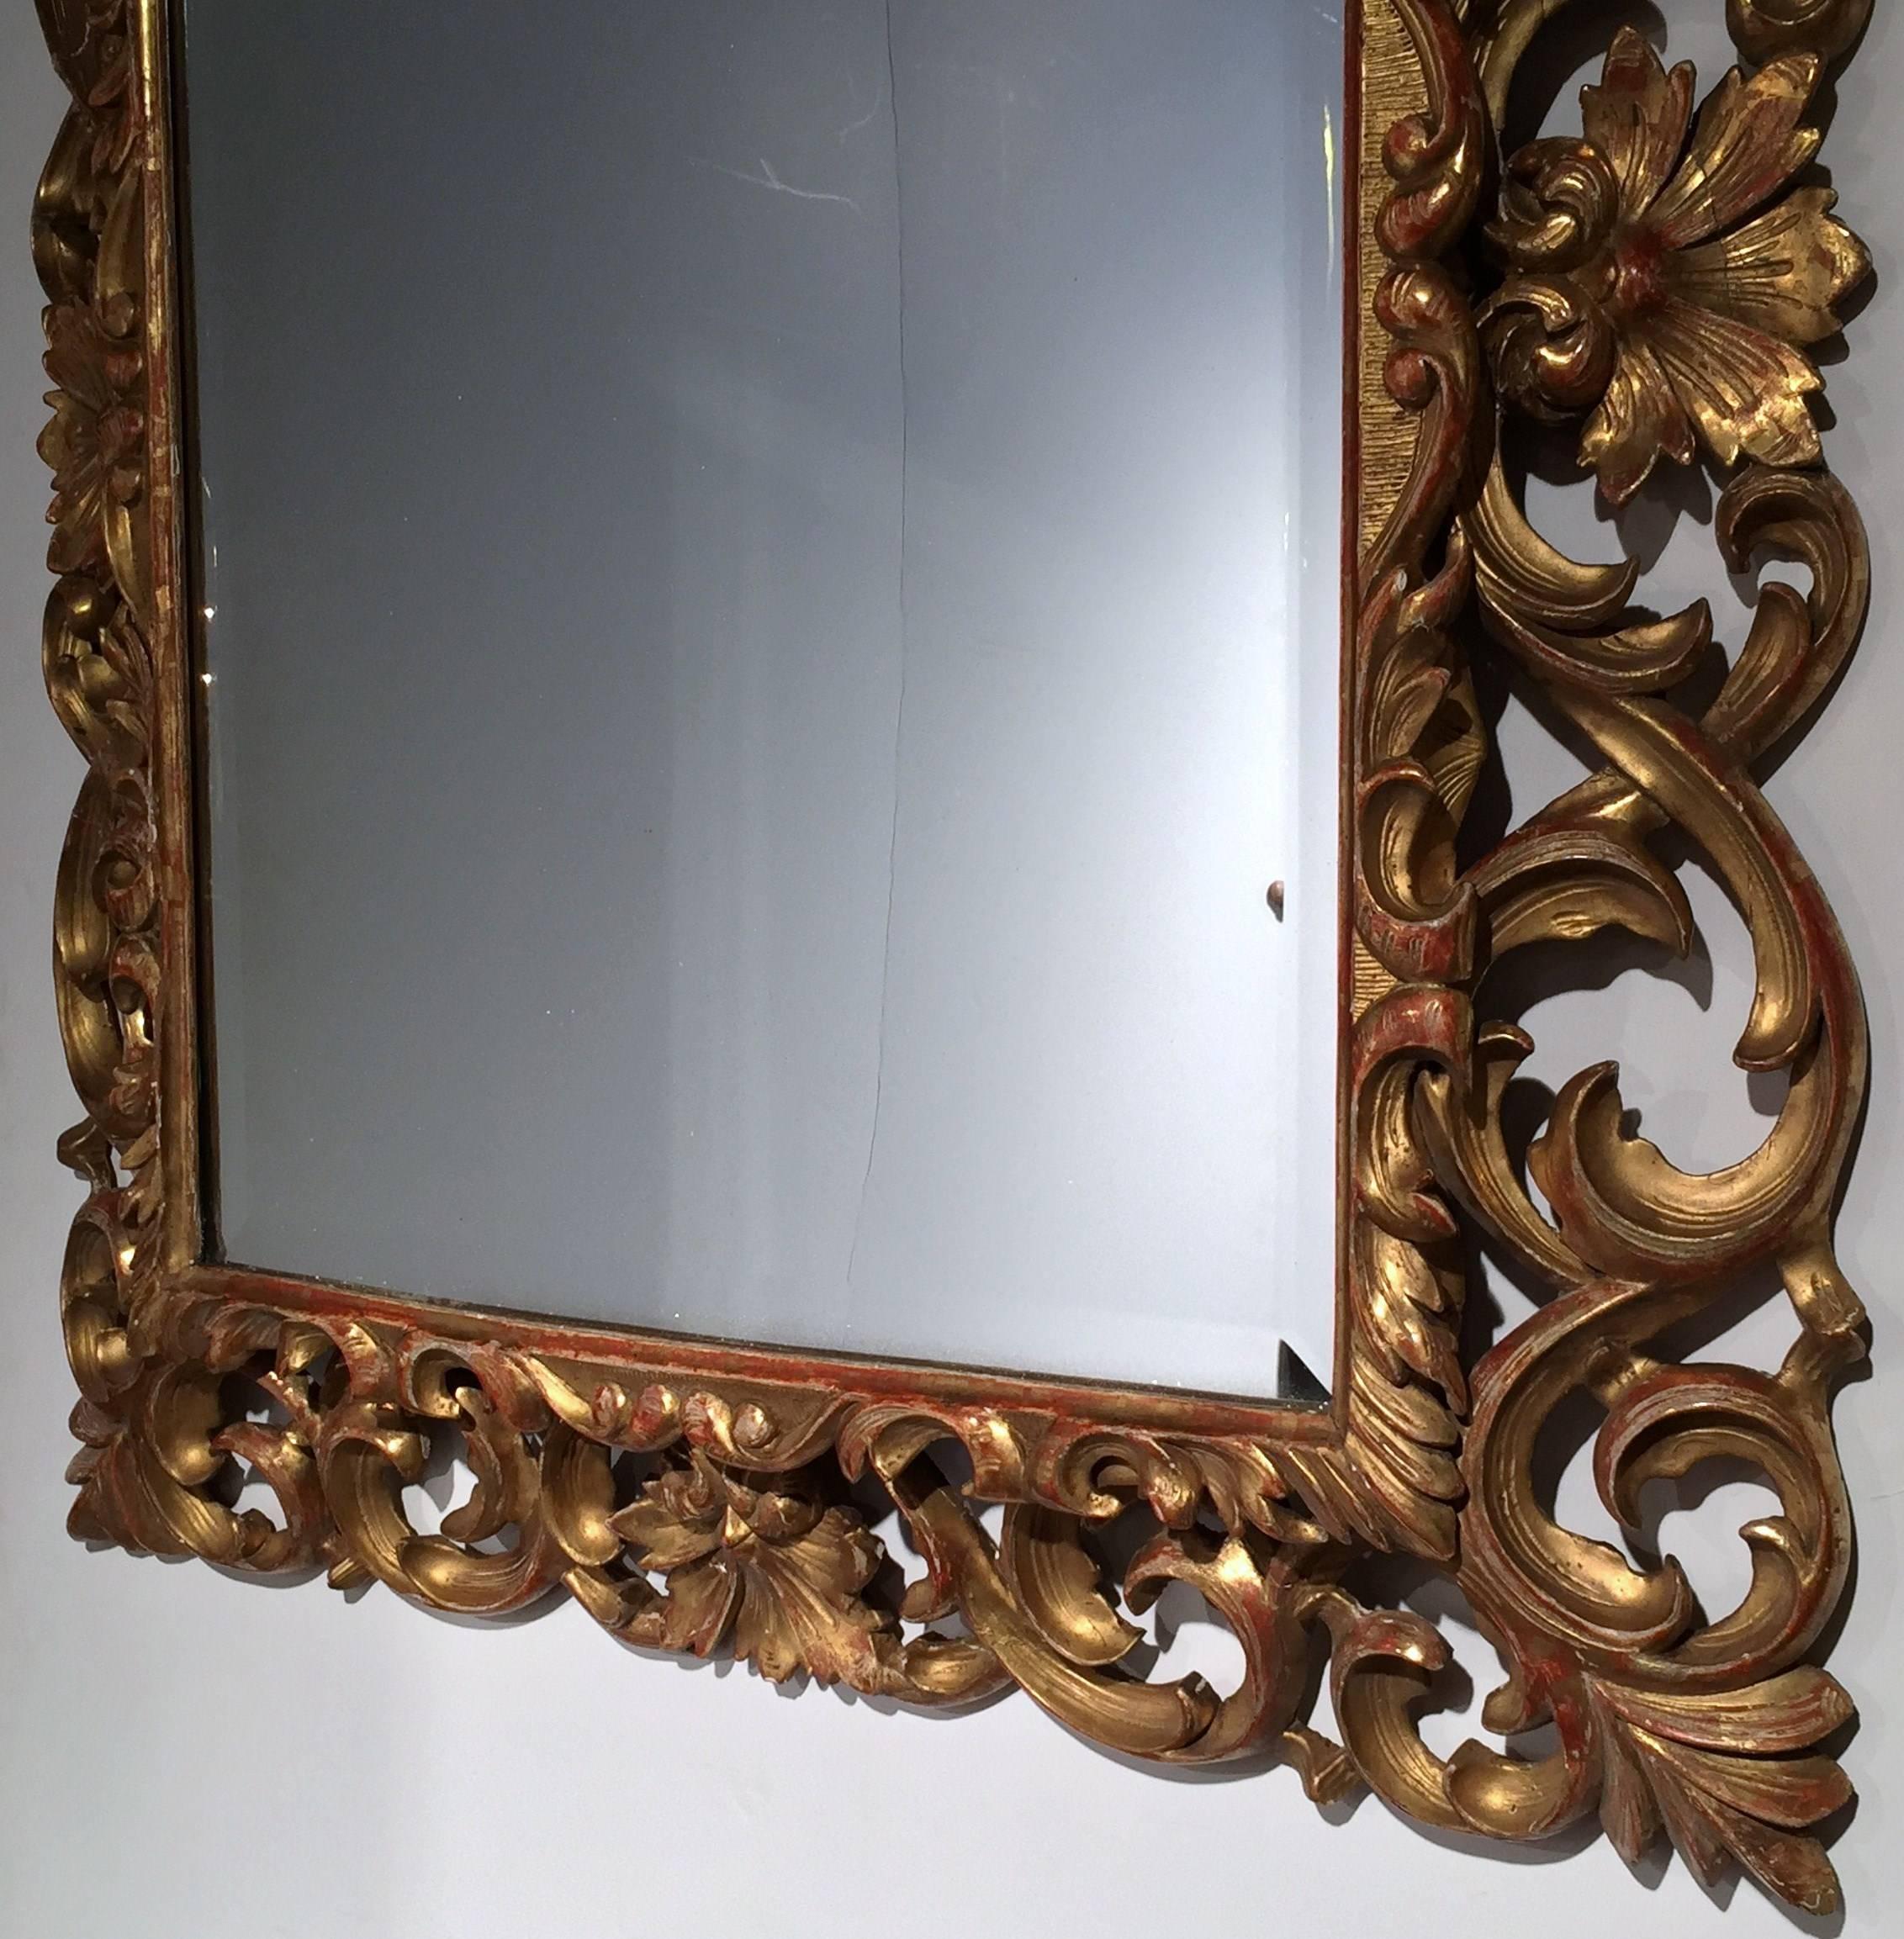 Rococo 19th Century French Napoleon III Carved Giltwood Mirror with Scroll & Leaf Decor